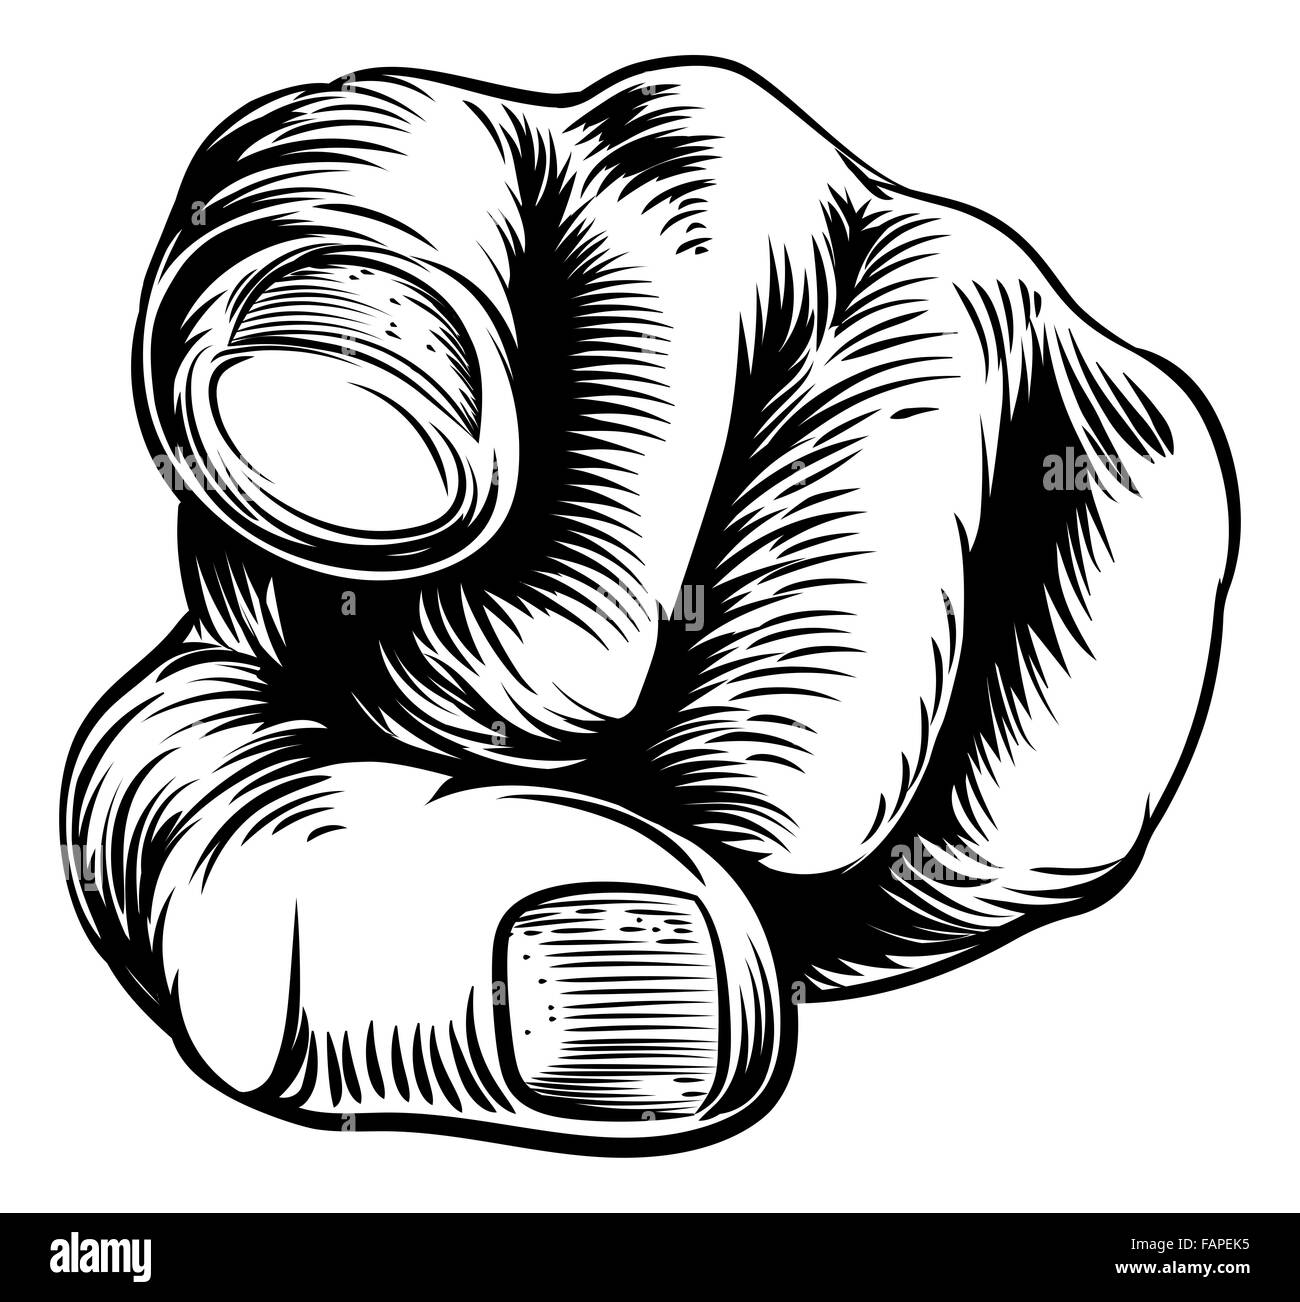 Woodcut vintage style hand pointing a finger at you in a wants you or needs you gesture Stock Photo